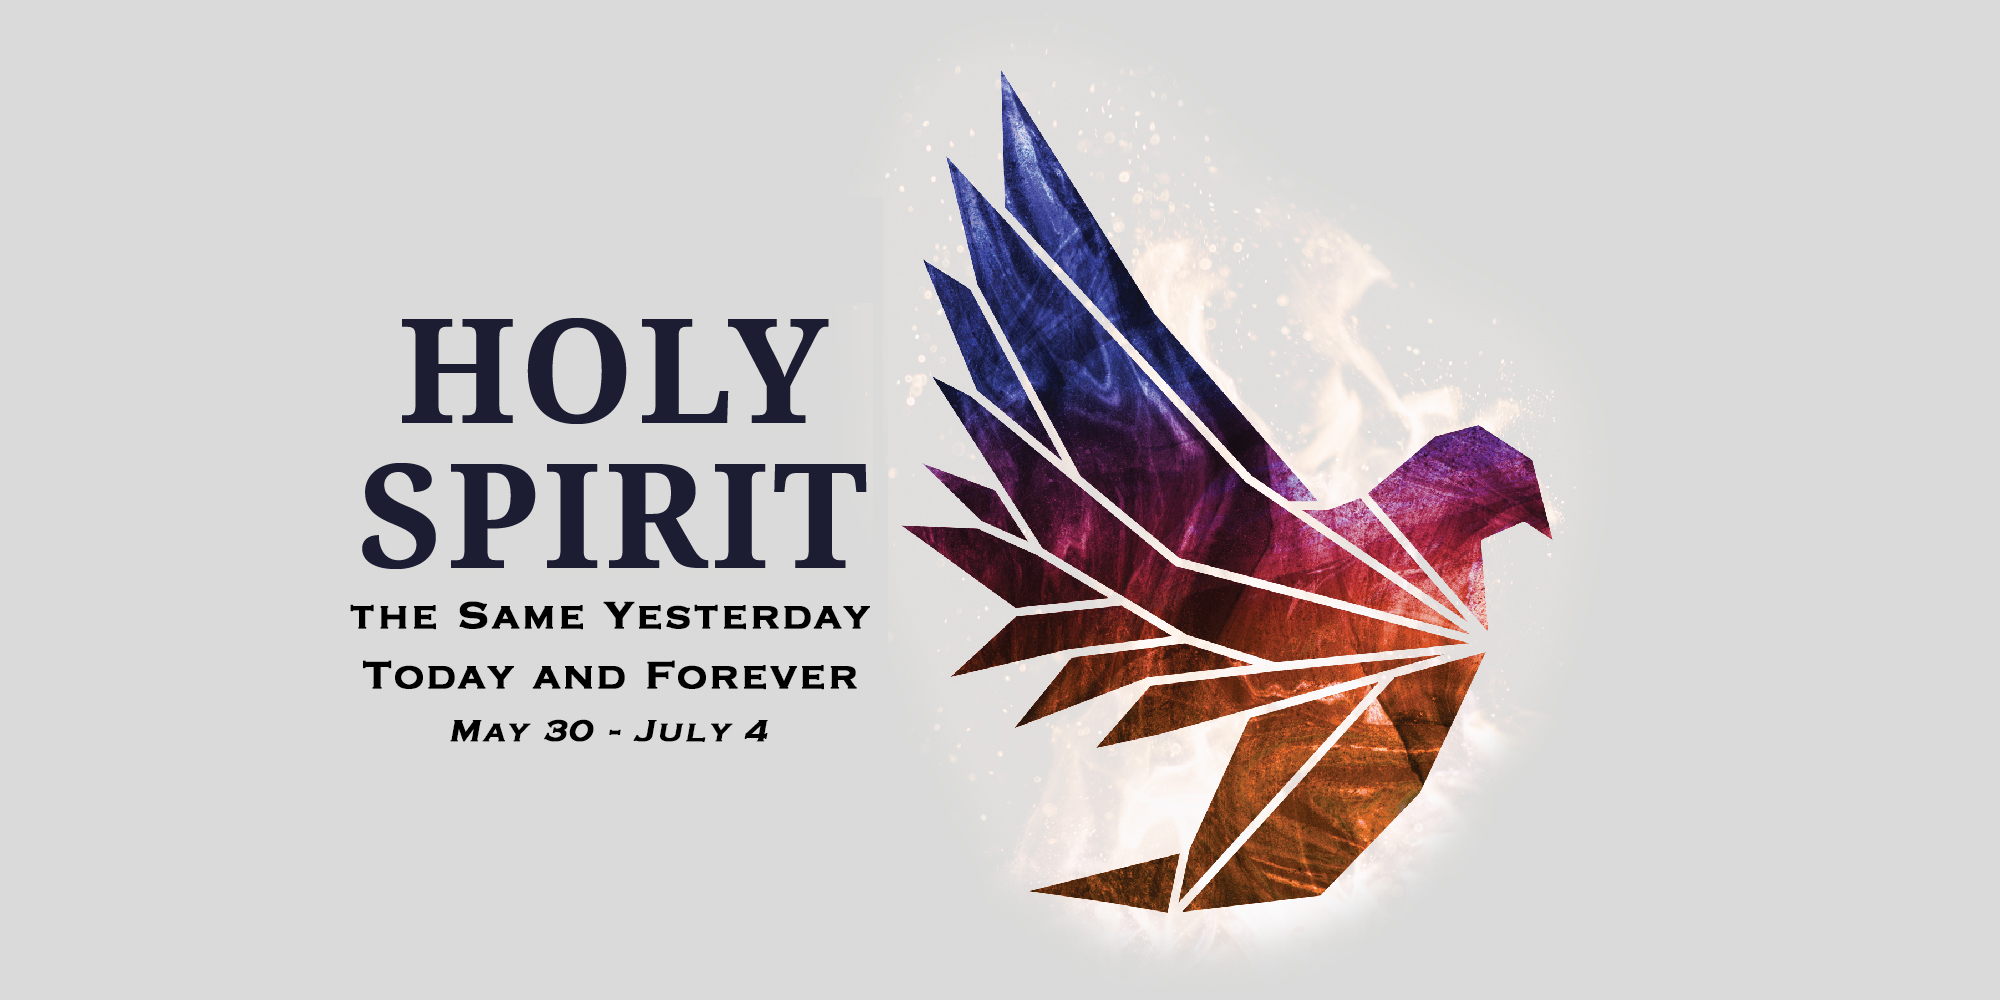 Let’s Talk About the HOLY Spirit